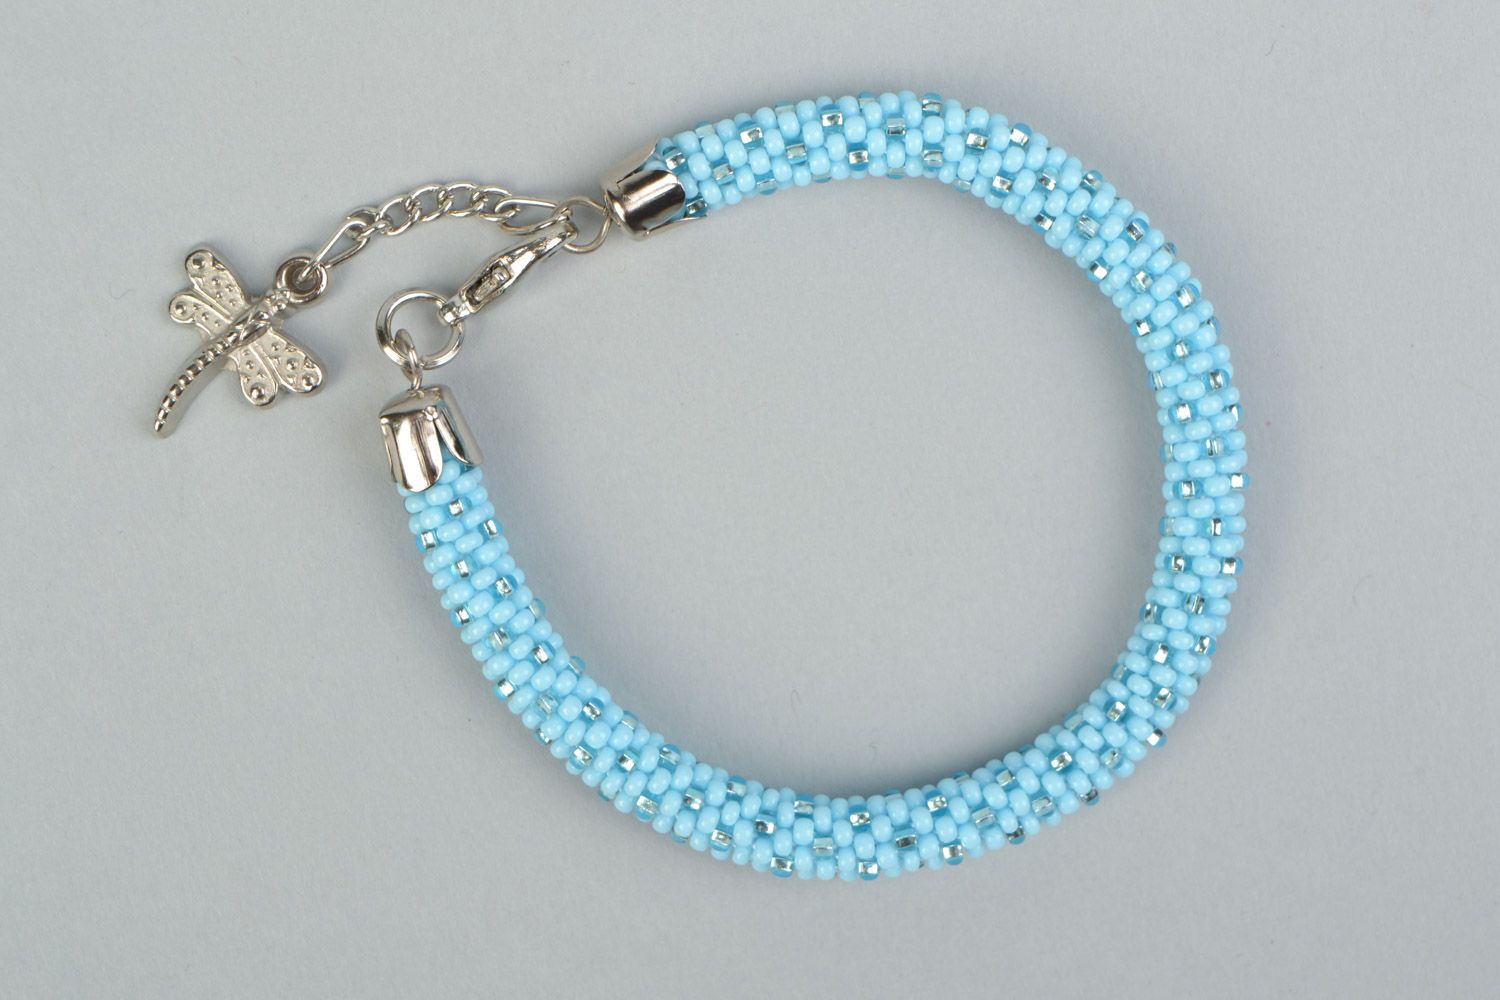 Tender handmade blue and silver beaded cord bracelet with dragonfly charm photo 2